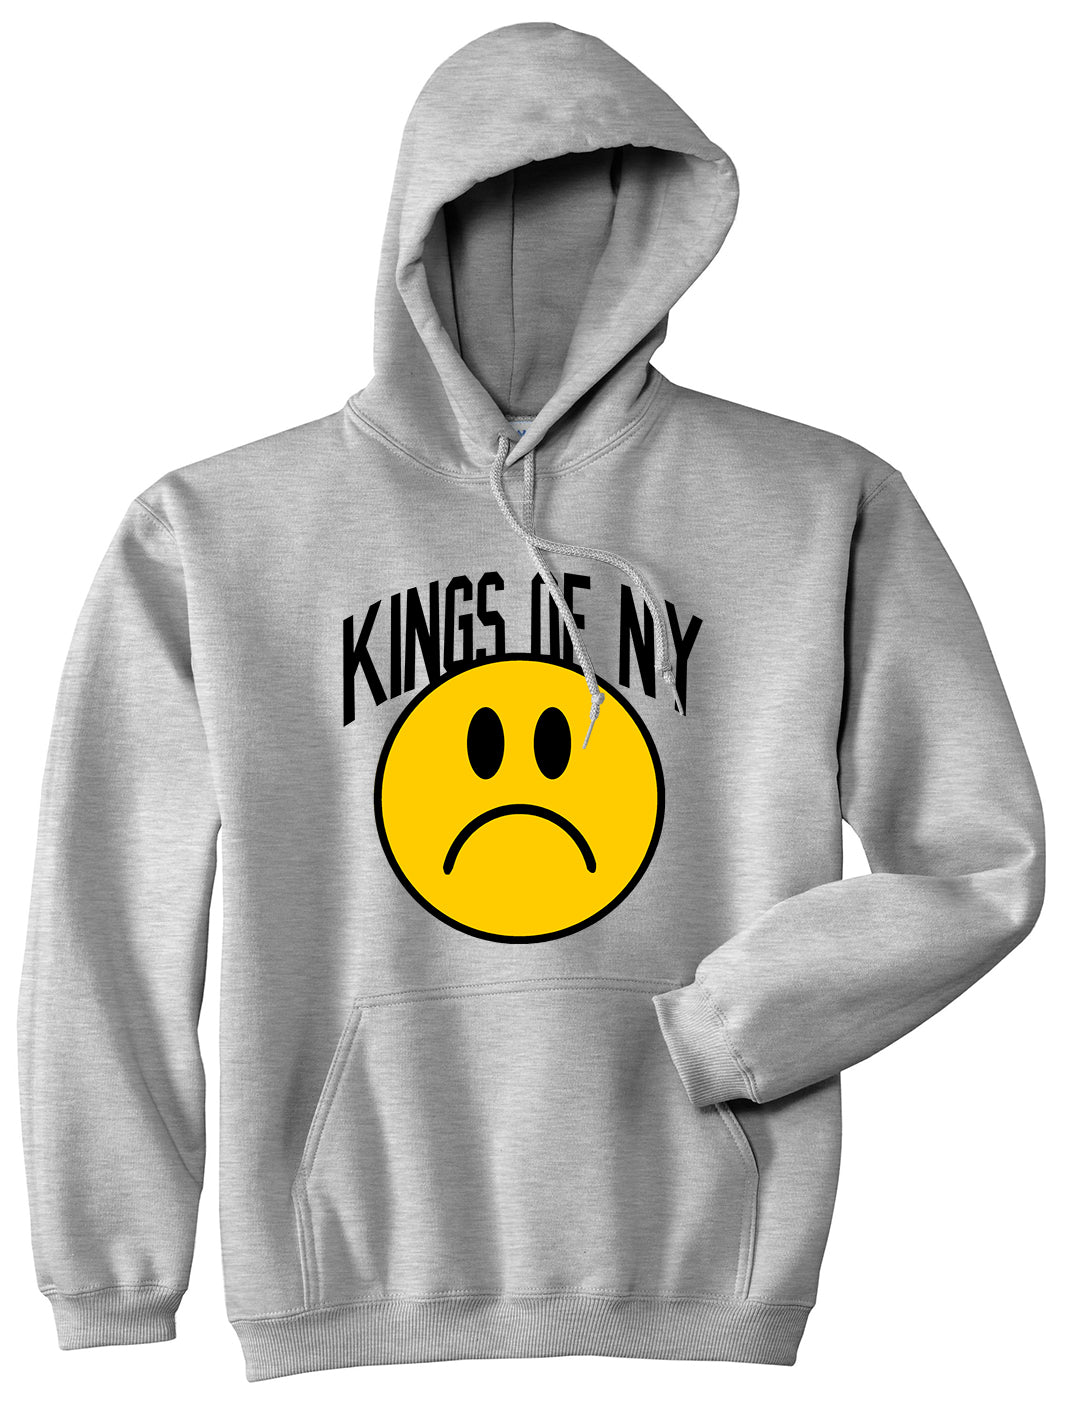 Im Upset Sad Face Mens Pullover Hoodie Grey by Kings Of NY